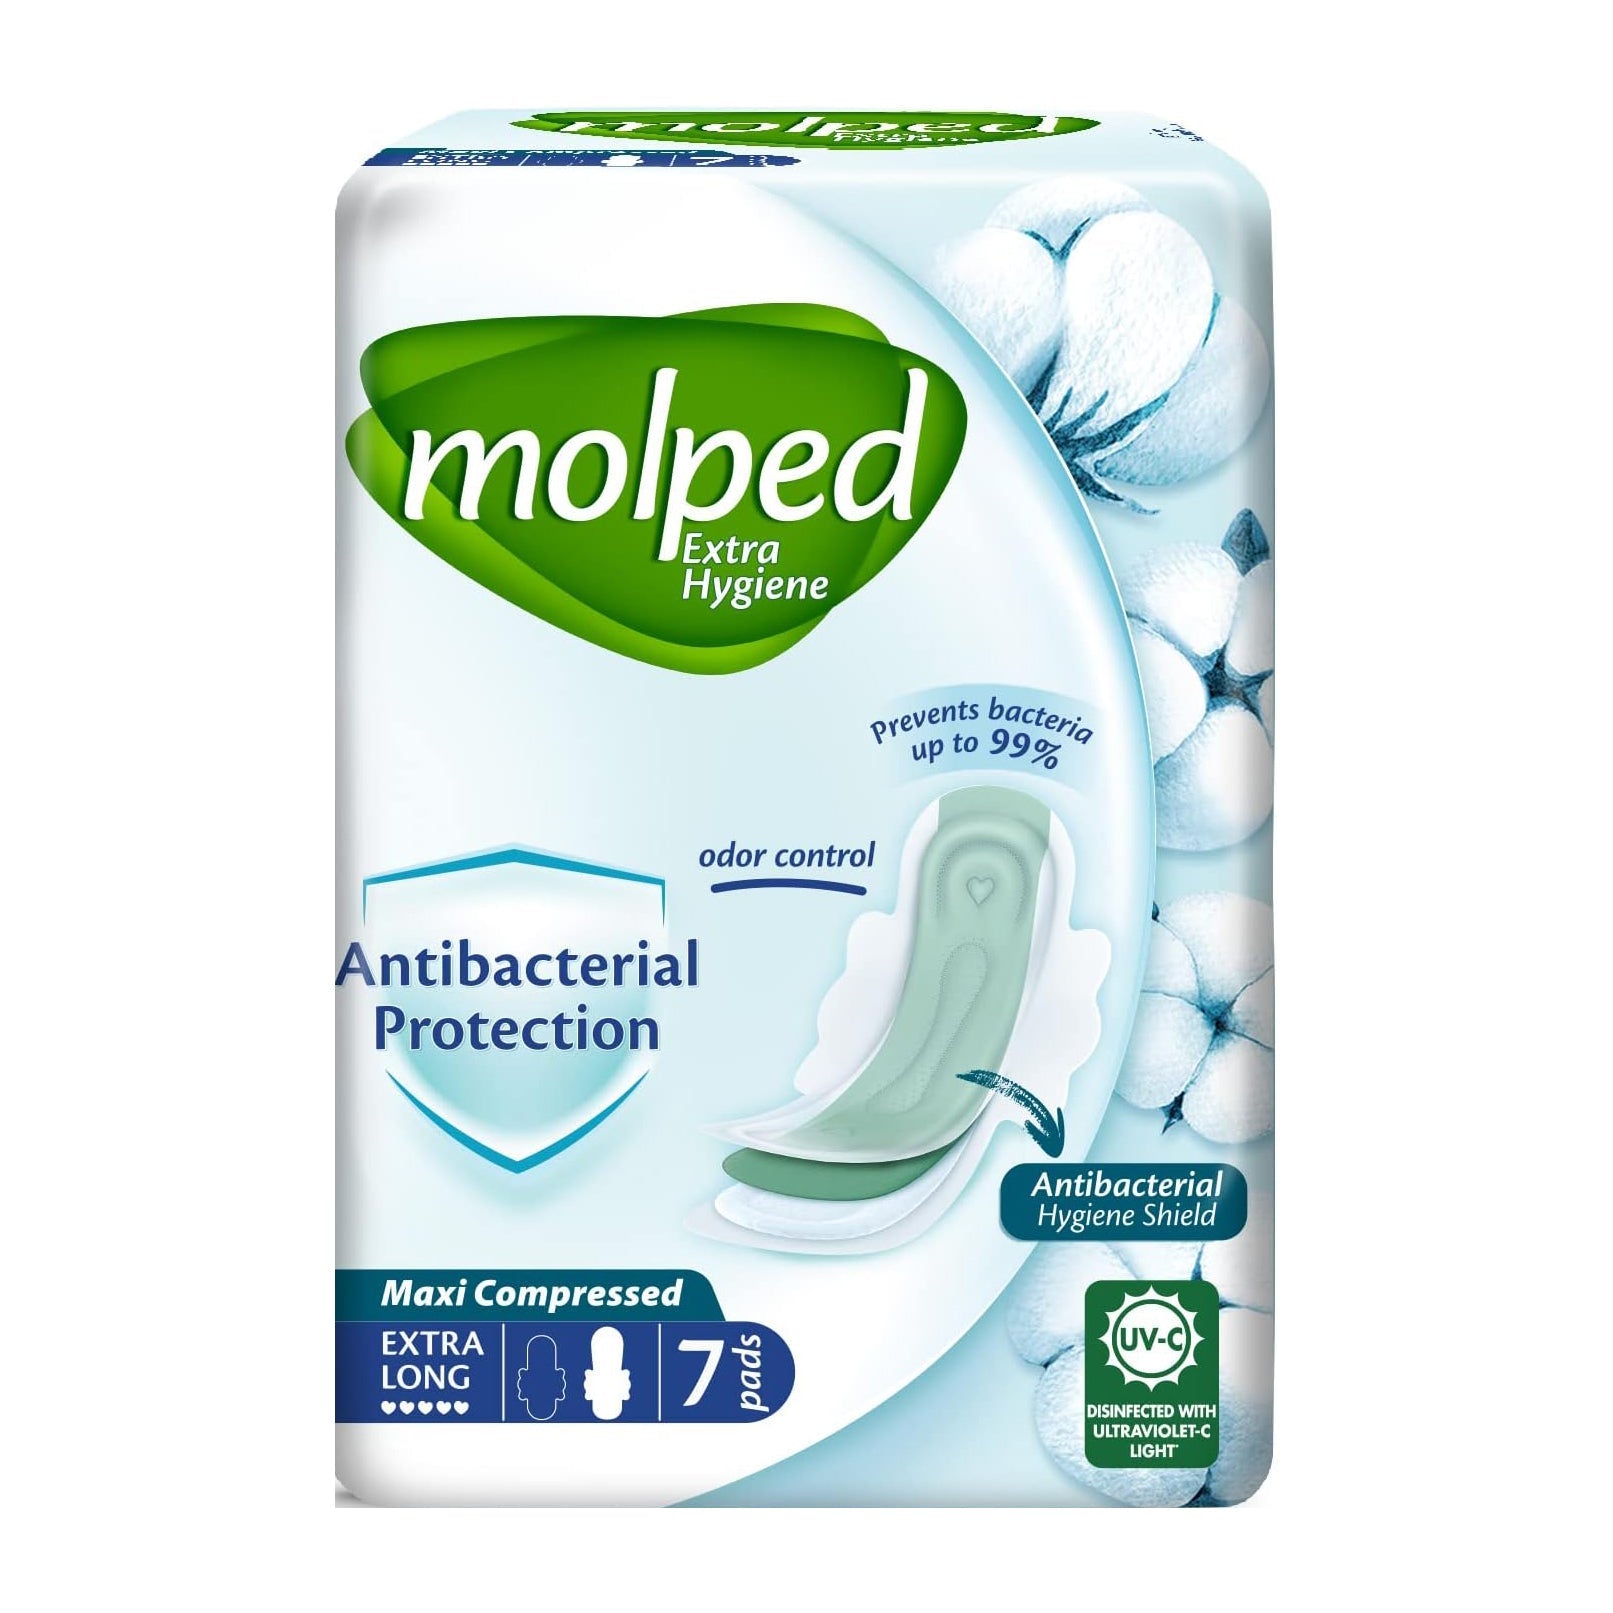 Molped Antibacterial Protection Maxi Compressed Extra Long Pads - 7 Pads - Bloom Pharmacy